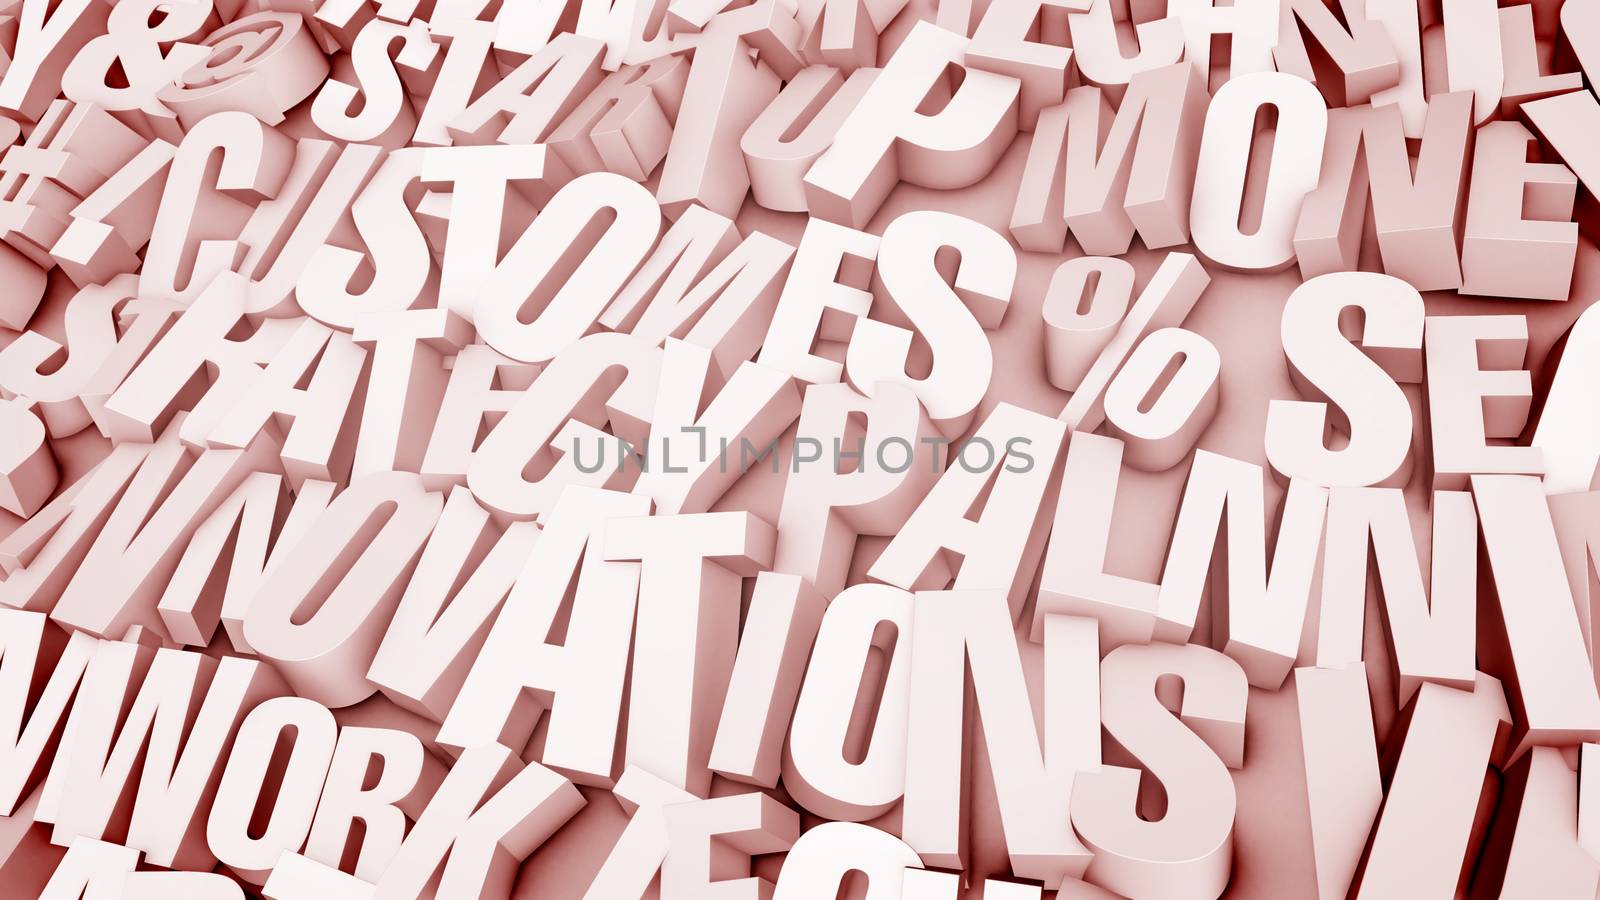 An inspirational 3d illustration of broken words located on white and camel backdround. They lie in inclined rows and shape the mood of art, freedom and thought. 